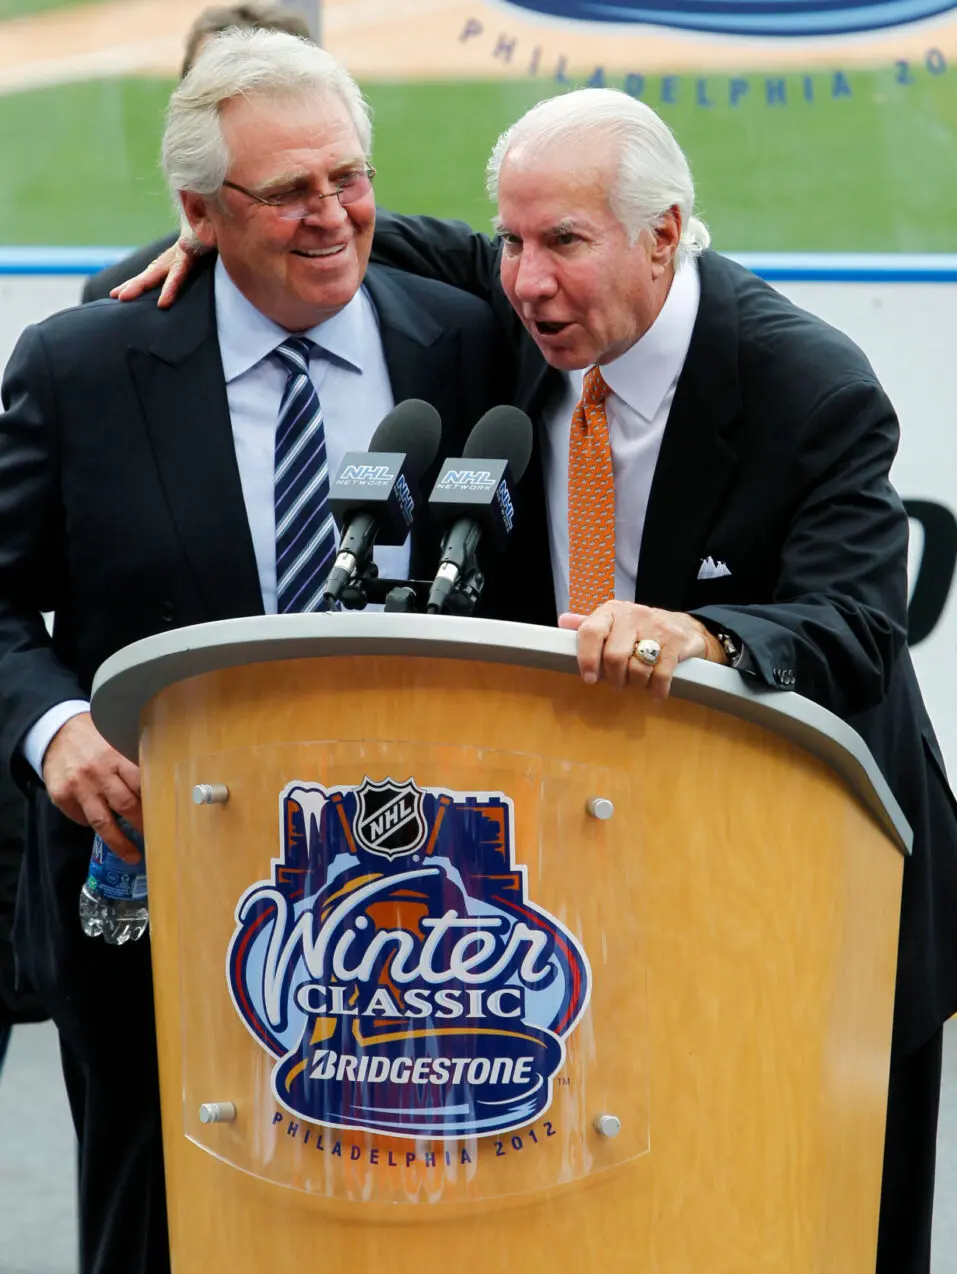 Rangers President Sather is joined at the podium by Philadelphia Flyers Chairman Snider as they joke about the 2012 Winter Classic hockey game to be played on January 2 at Citizens Bank Ballpark during a news conference at the ballpark in Philadelphia